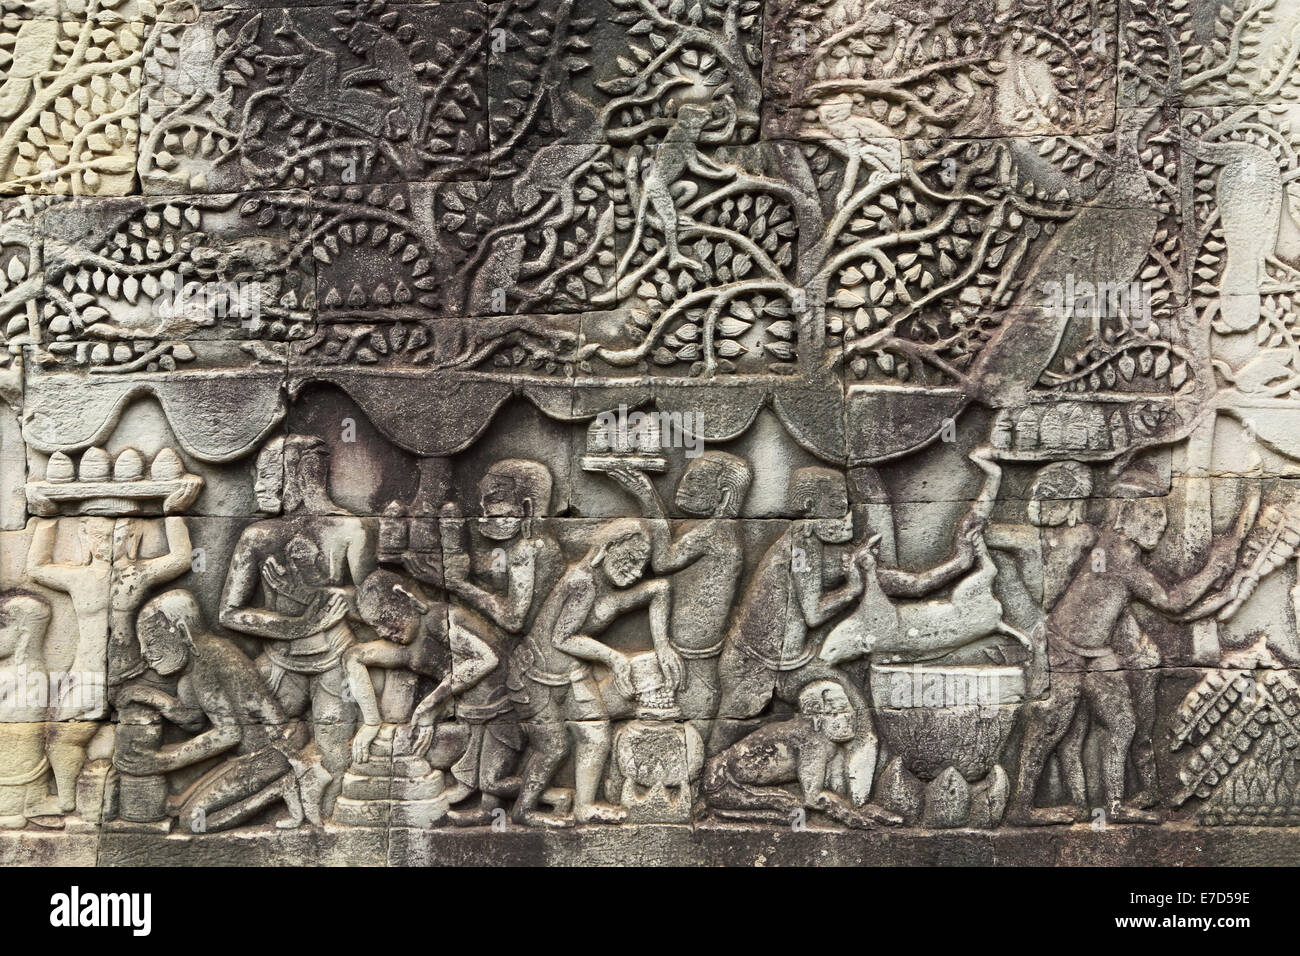 Bas relief panel at the Bayon temple, part of Angkor Wat in Siem Reap, Cambodia. Stock Photo